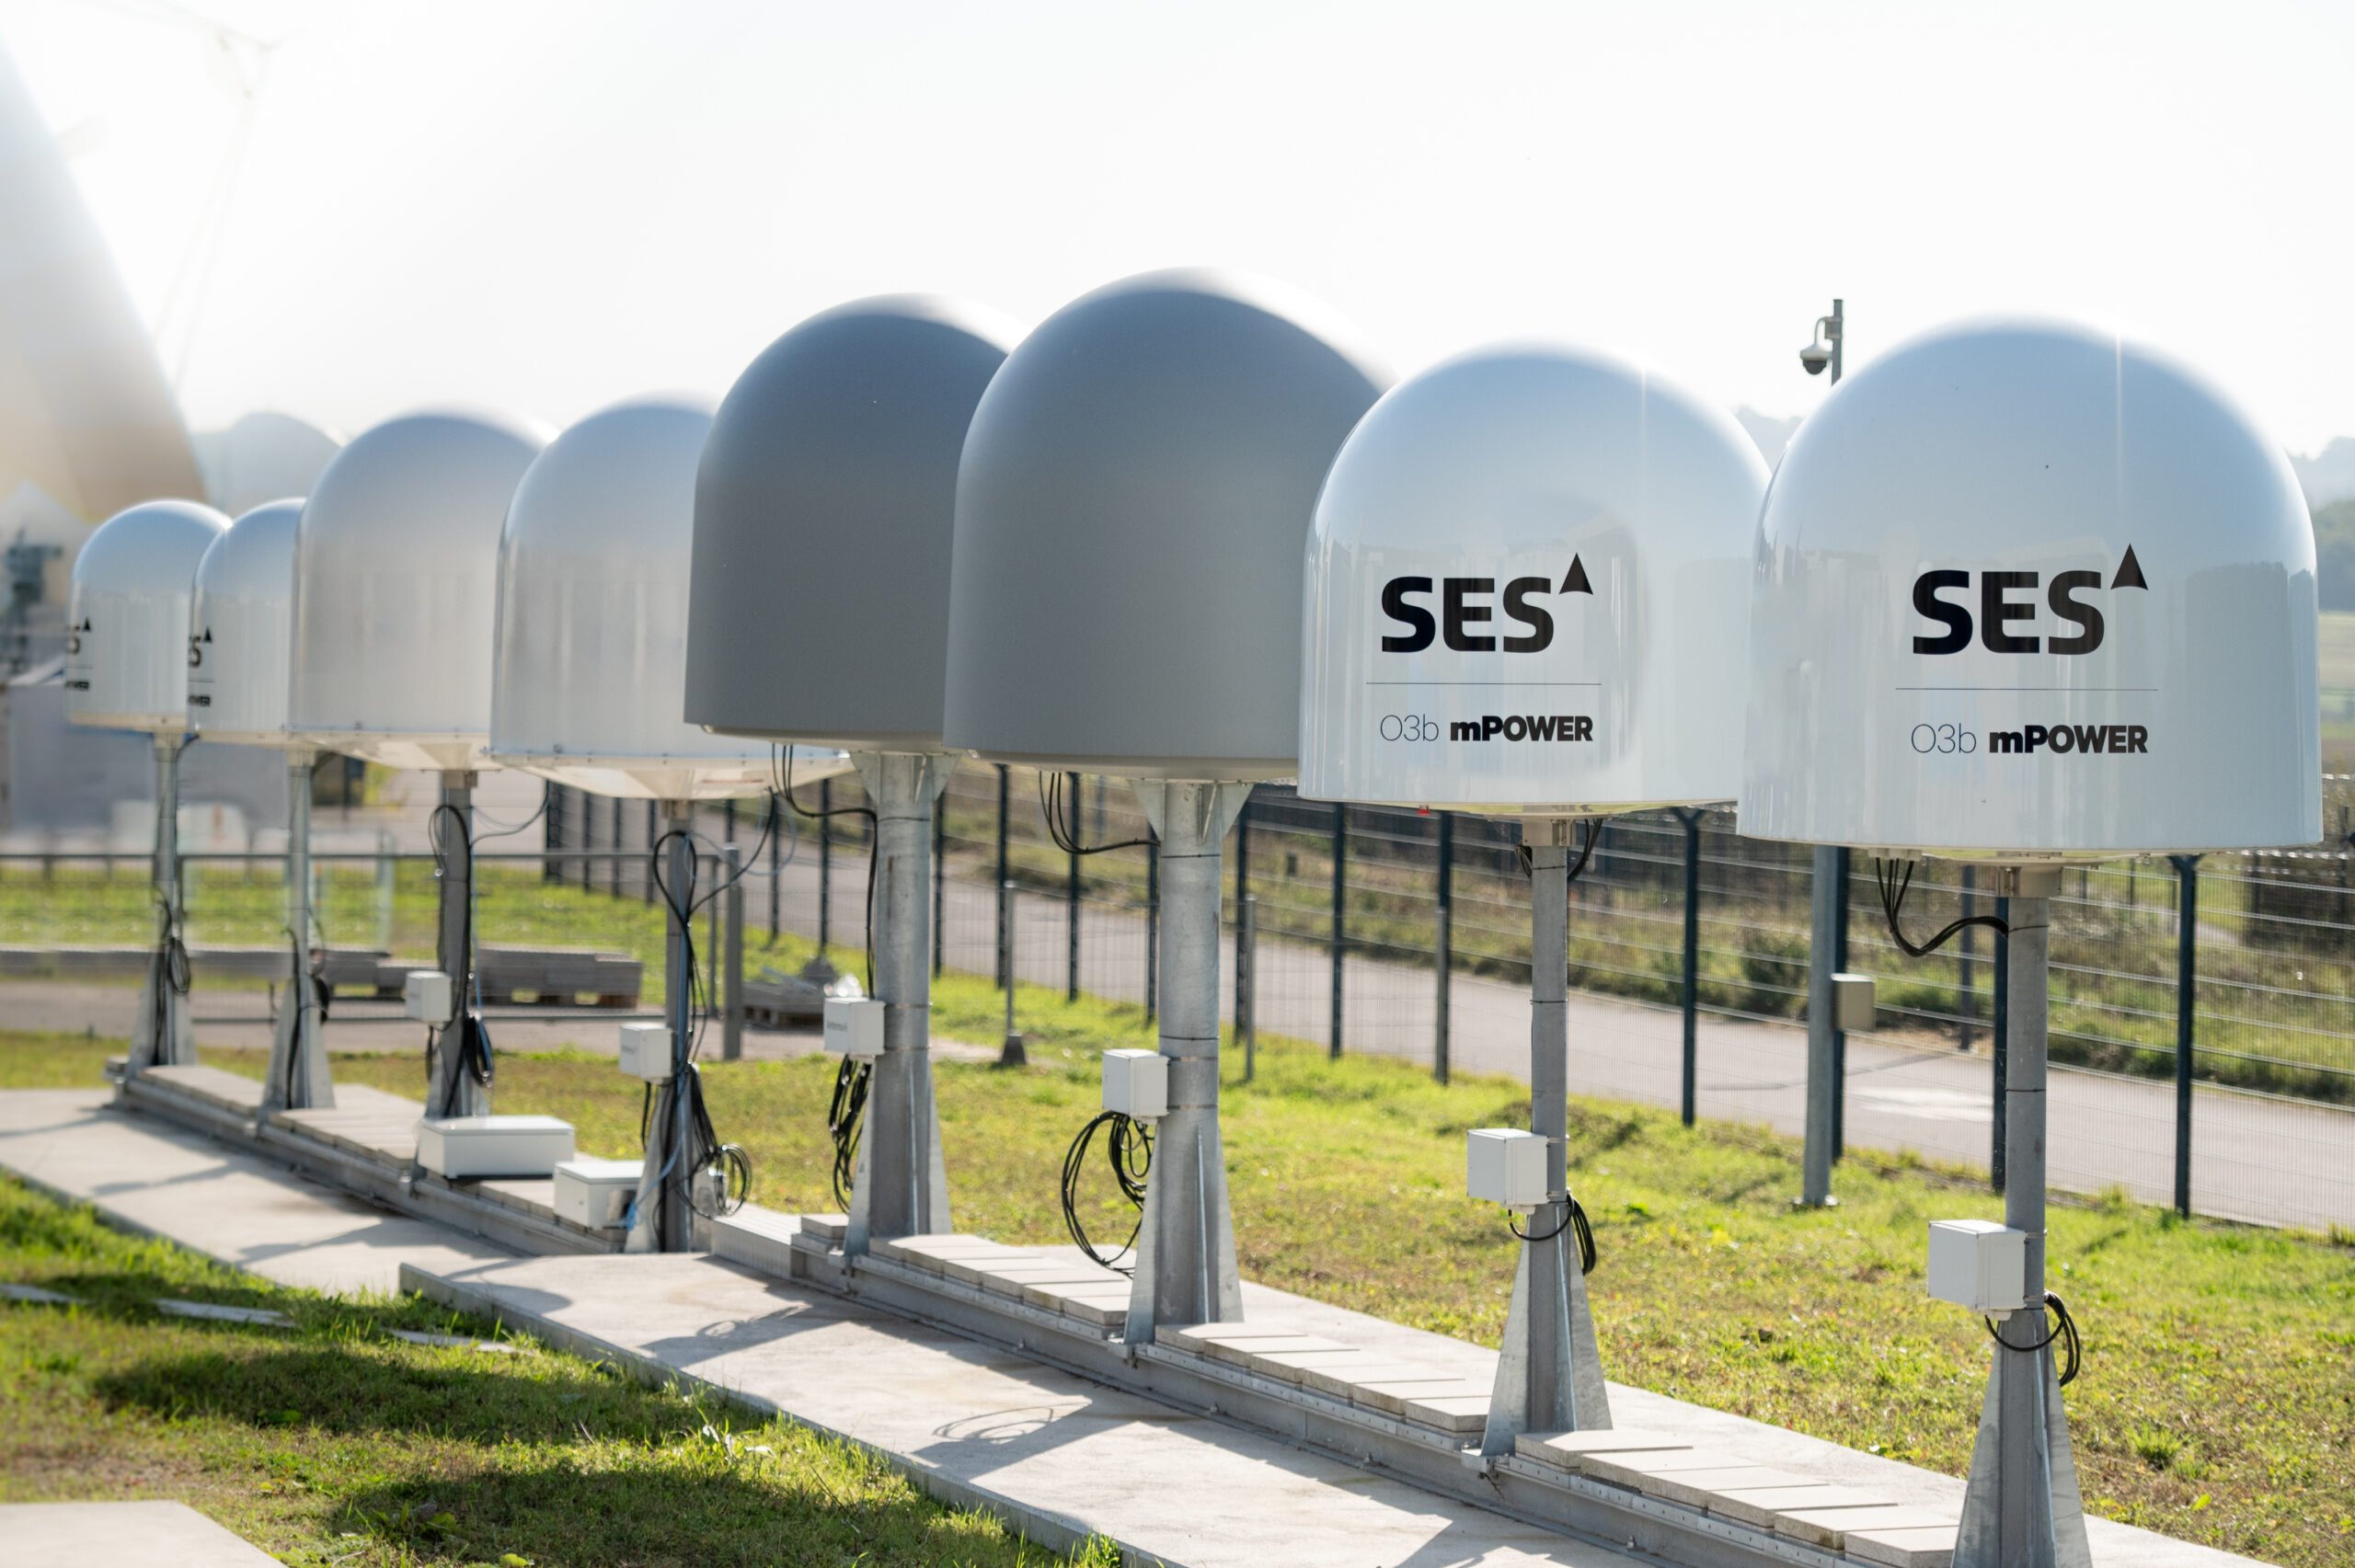 With O3b mPOWER, SES is leveraging the existing development of MEO and low-latency high-throughput Ka-band. Shown is an SES O3bmPOWER antenna field in Betzdorf, Luxembourg. (SES photo)